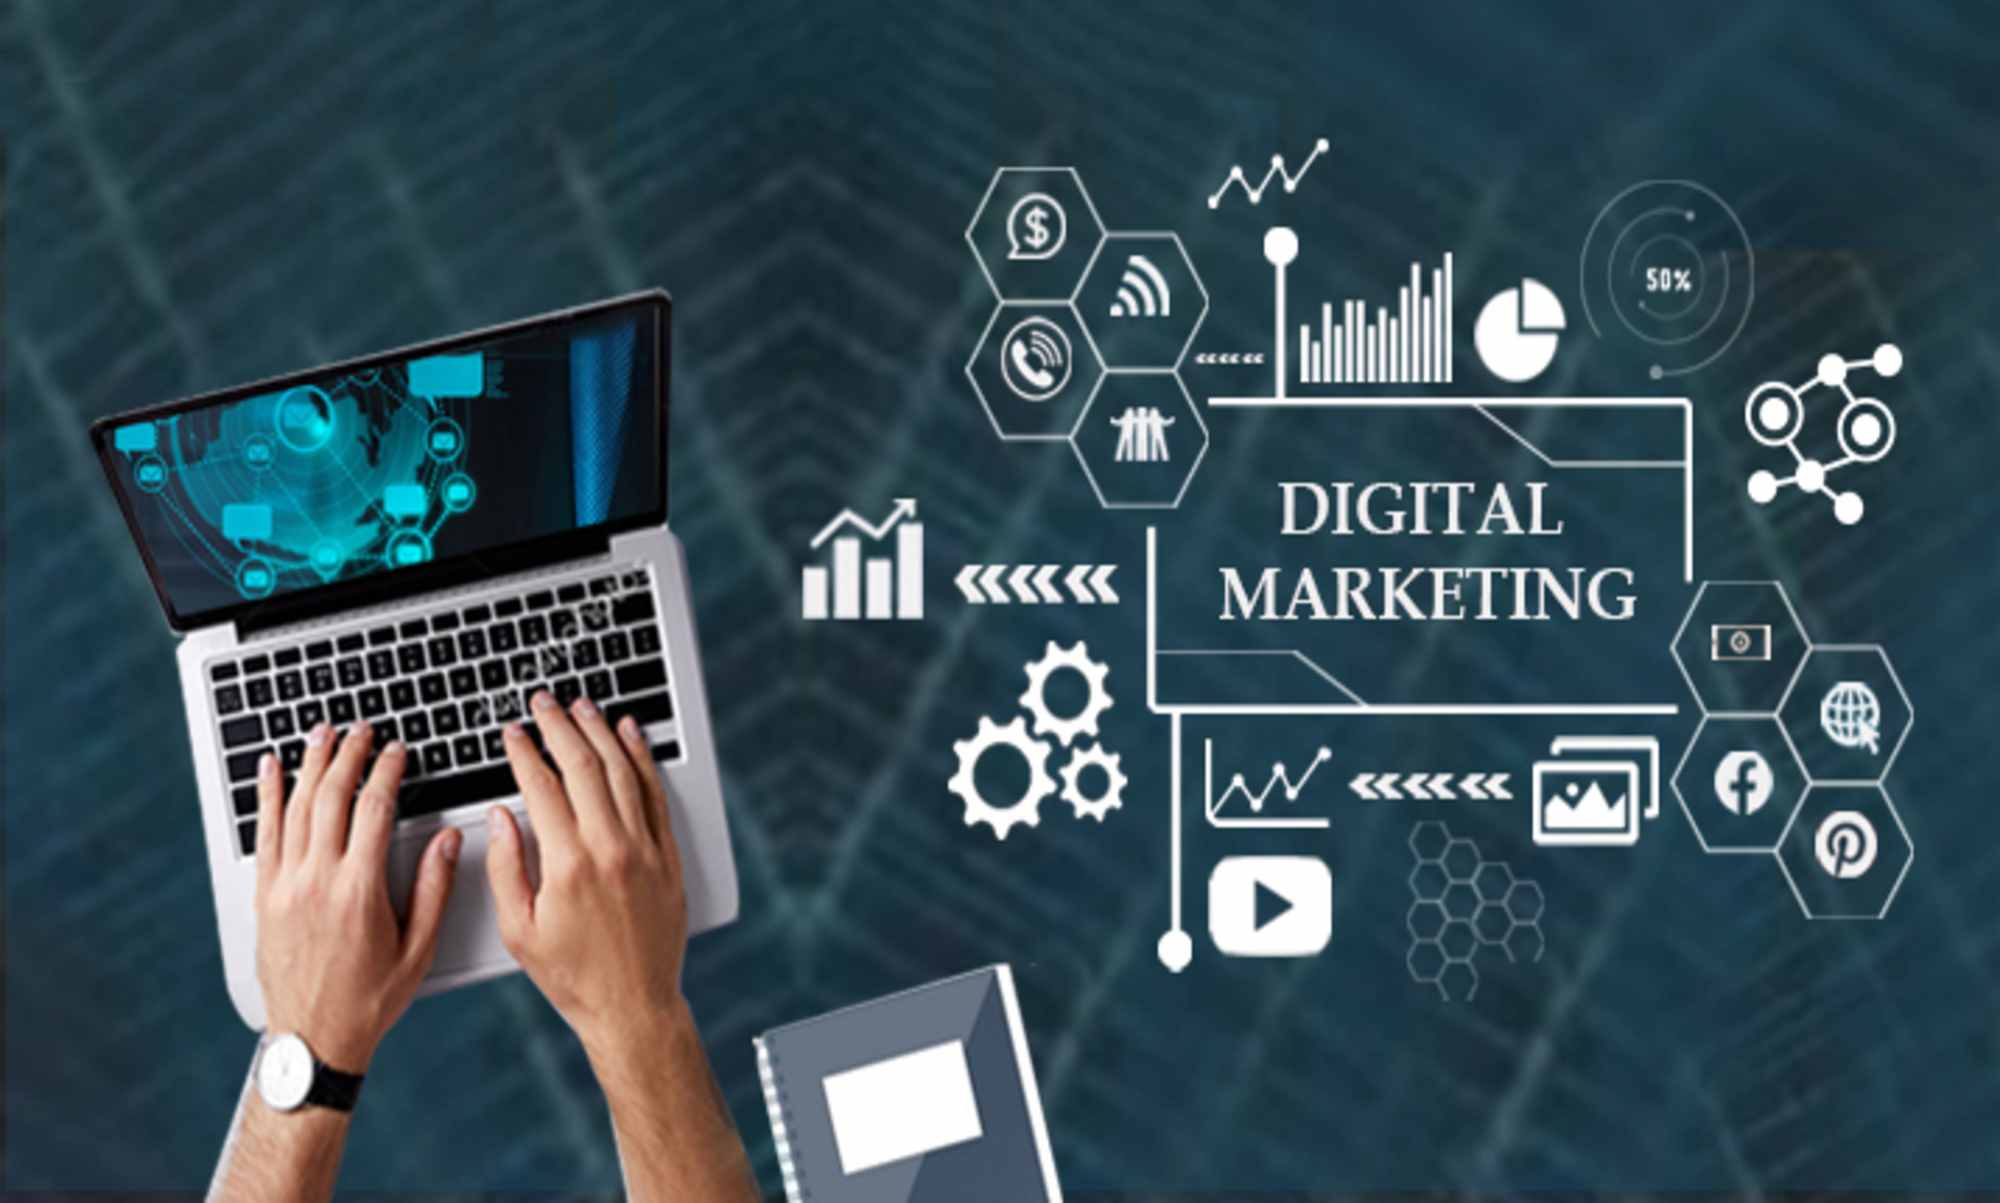 The Digital Marketing Trends in 2022. What is the future of marketing?